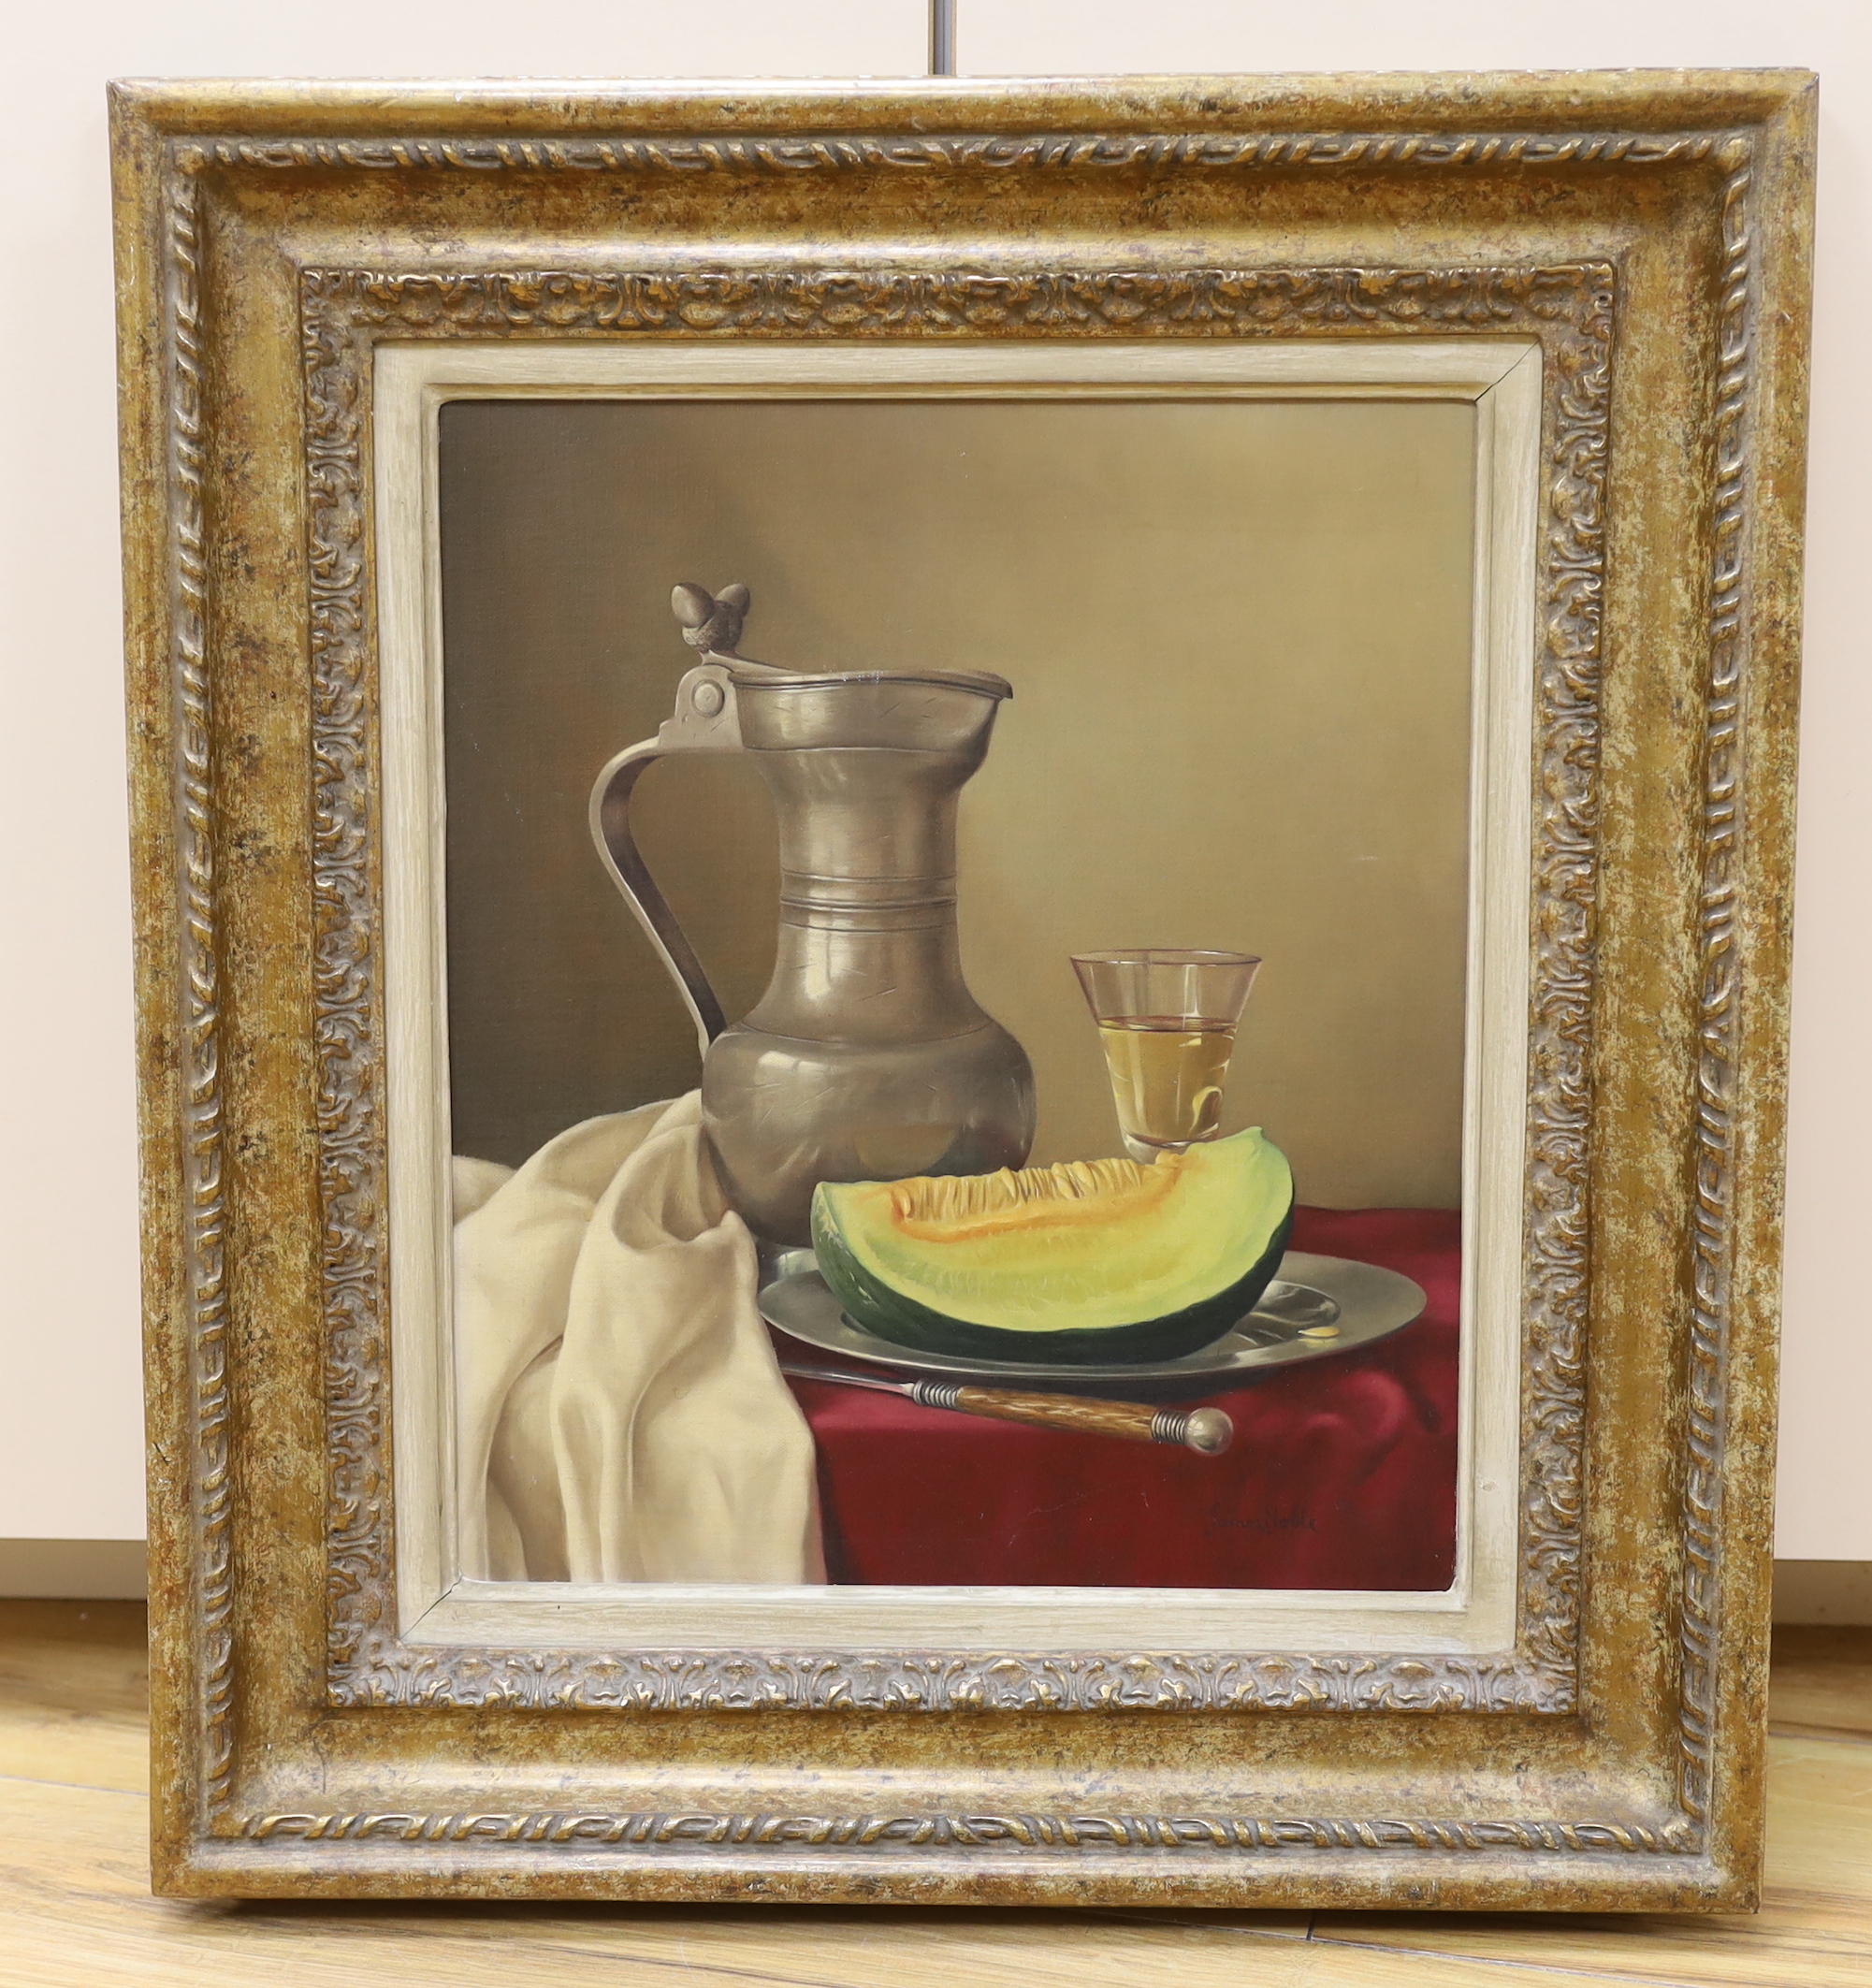 James Noble (British, 1919-1985), Still life with a pewter jug, a melon and a glass of white wine, signed, Stacey Marks label verso, dated 1st December, 1961, 34 x 29cm